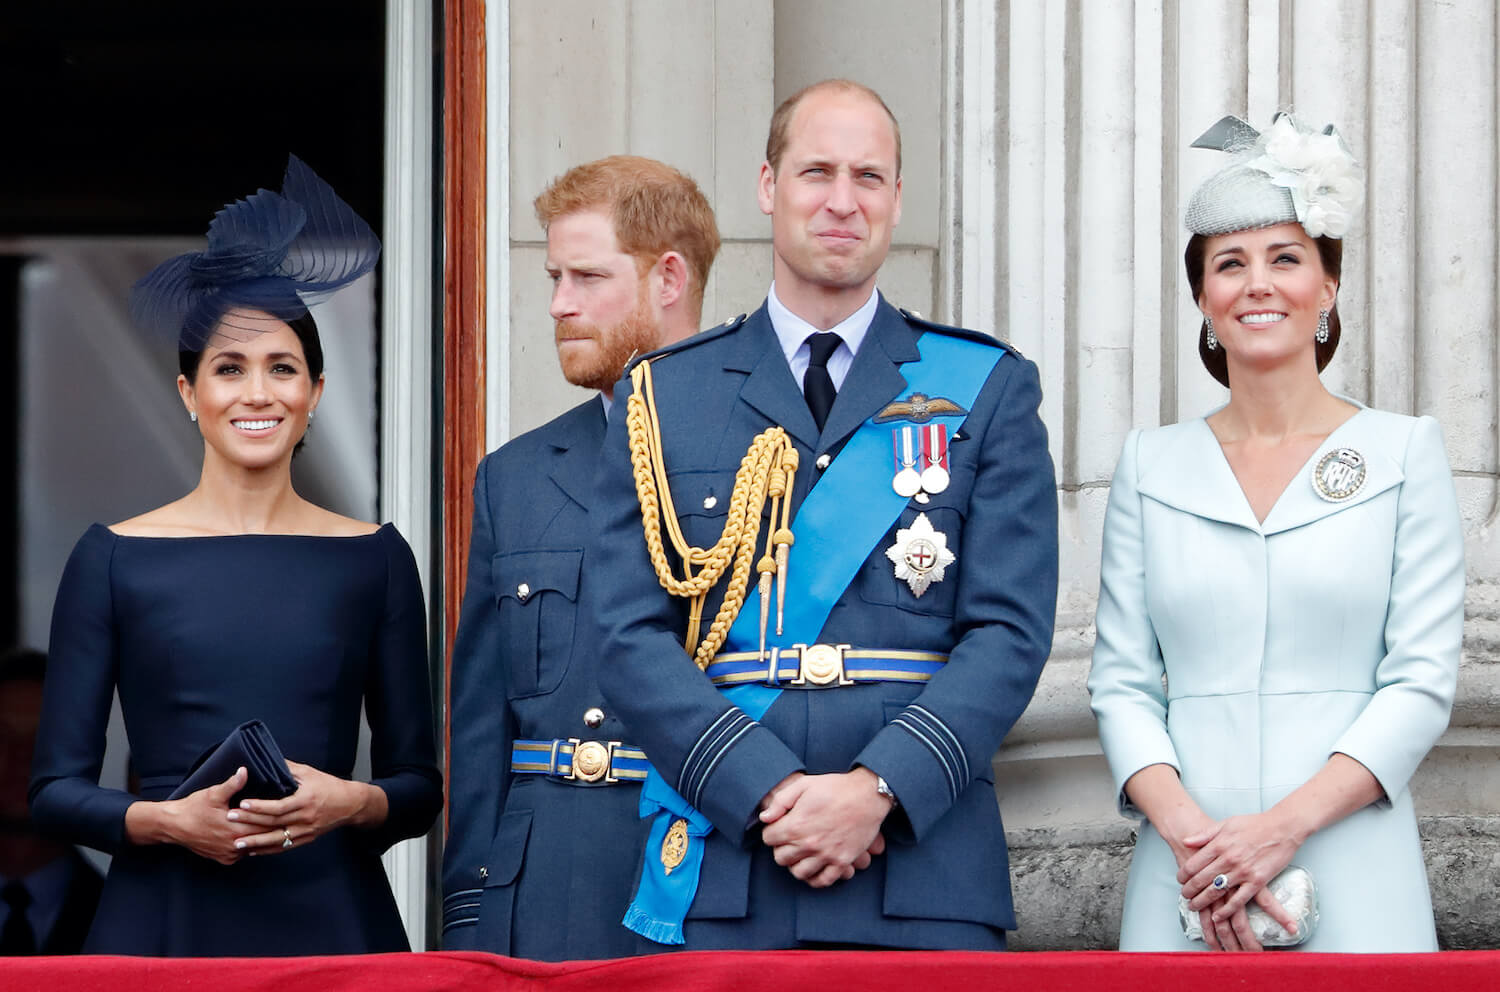 Royal Expert Claims Prince Harry and Meghan Markle’s Attacks Have Pushed Prince William and Kate Middleton Closer Together